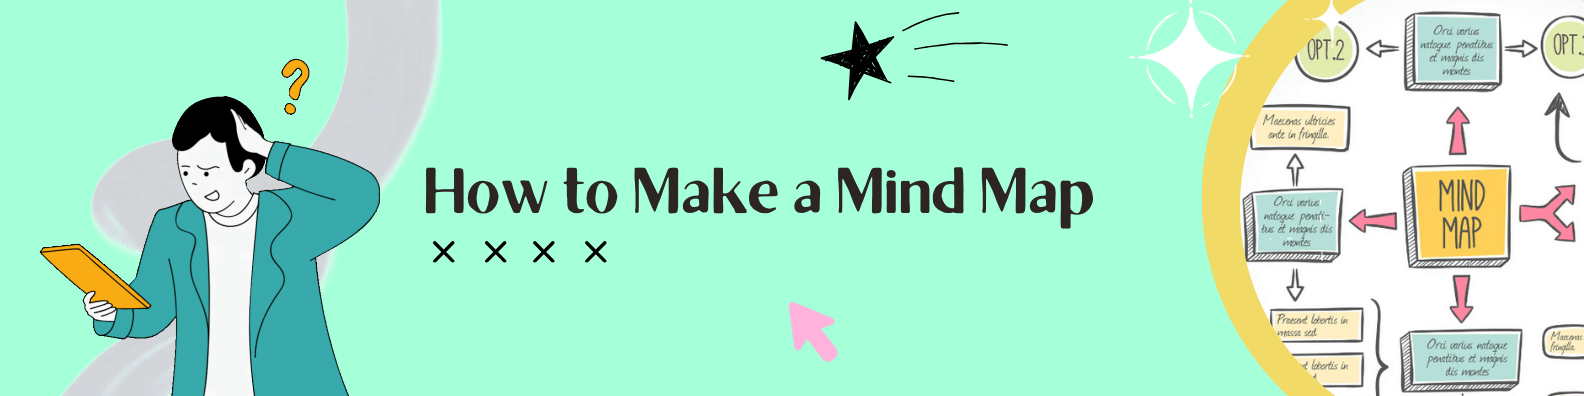 how to make a mind map cover